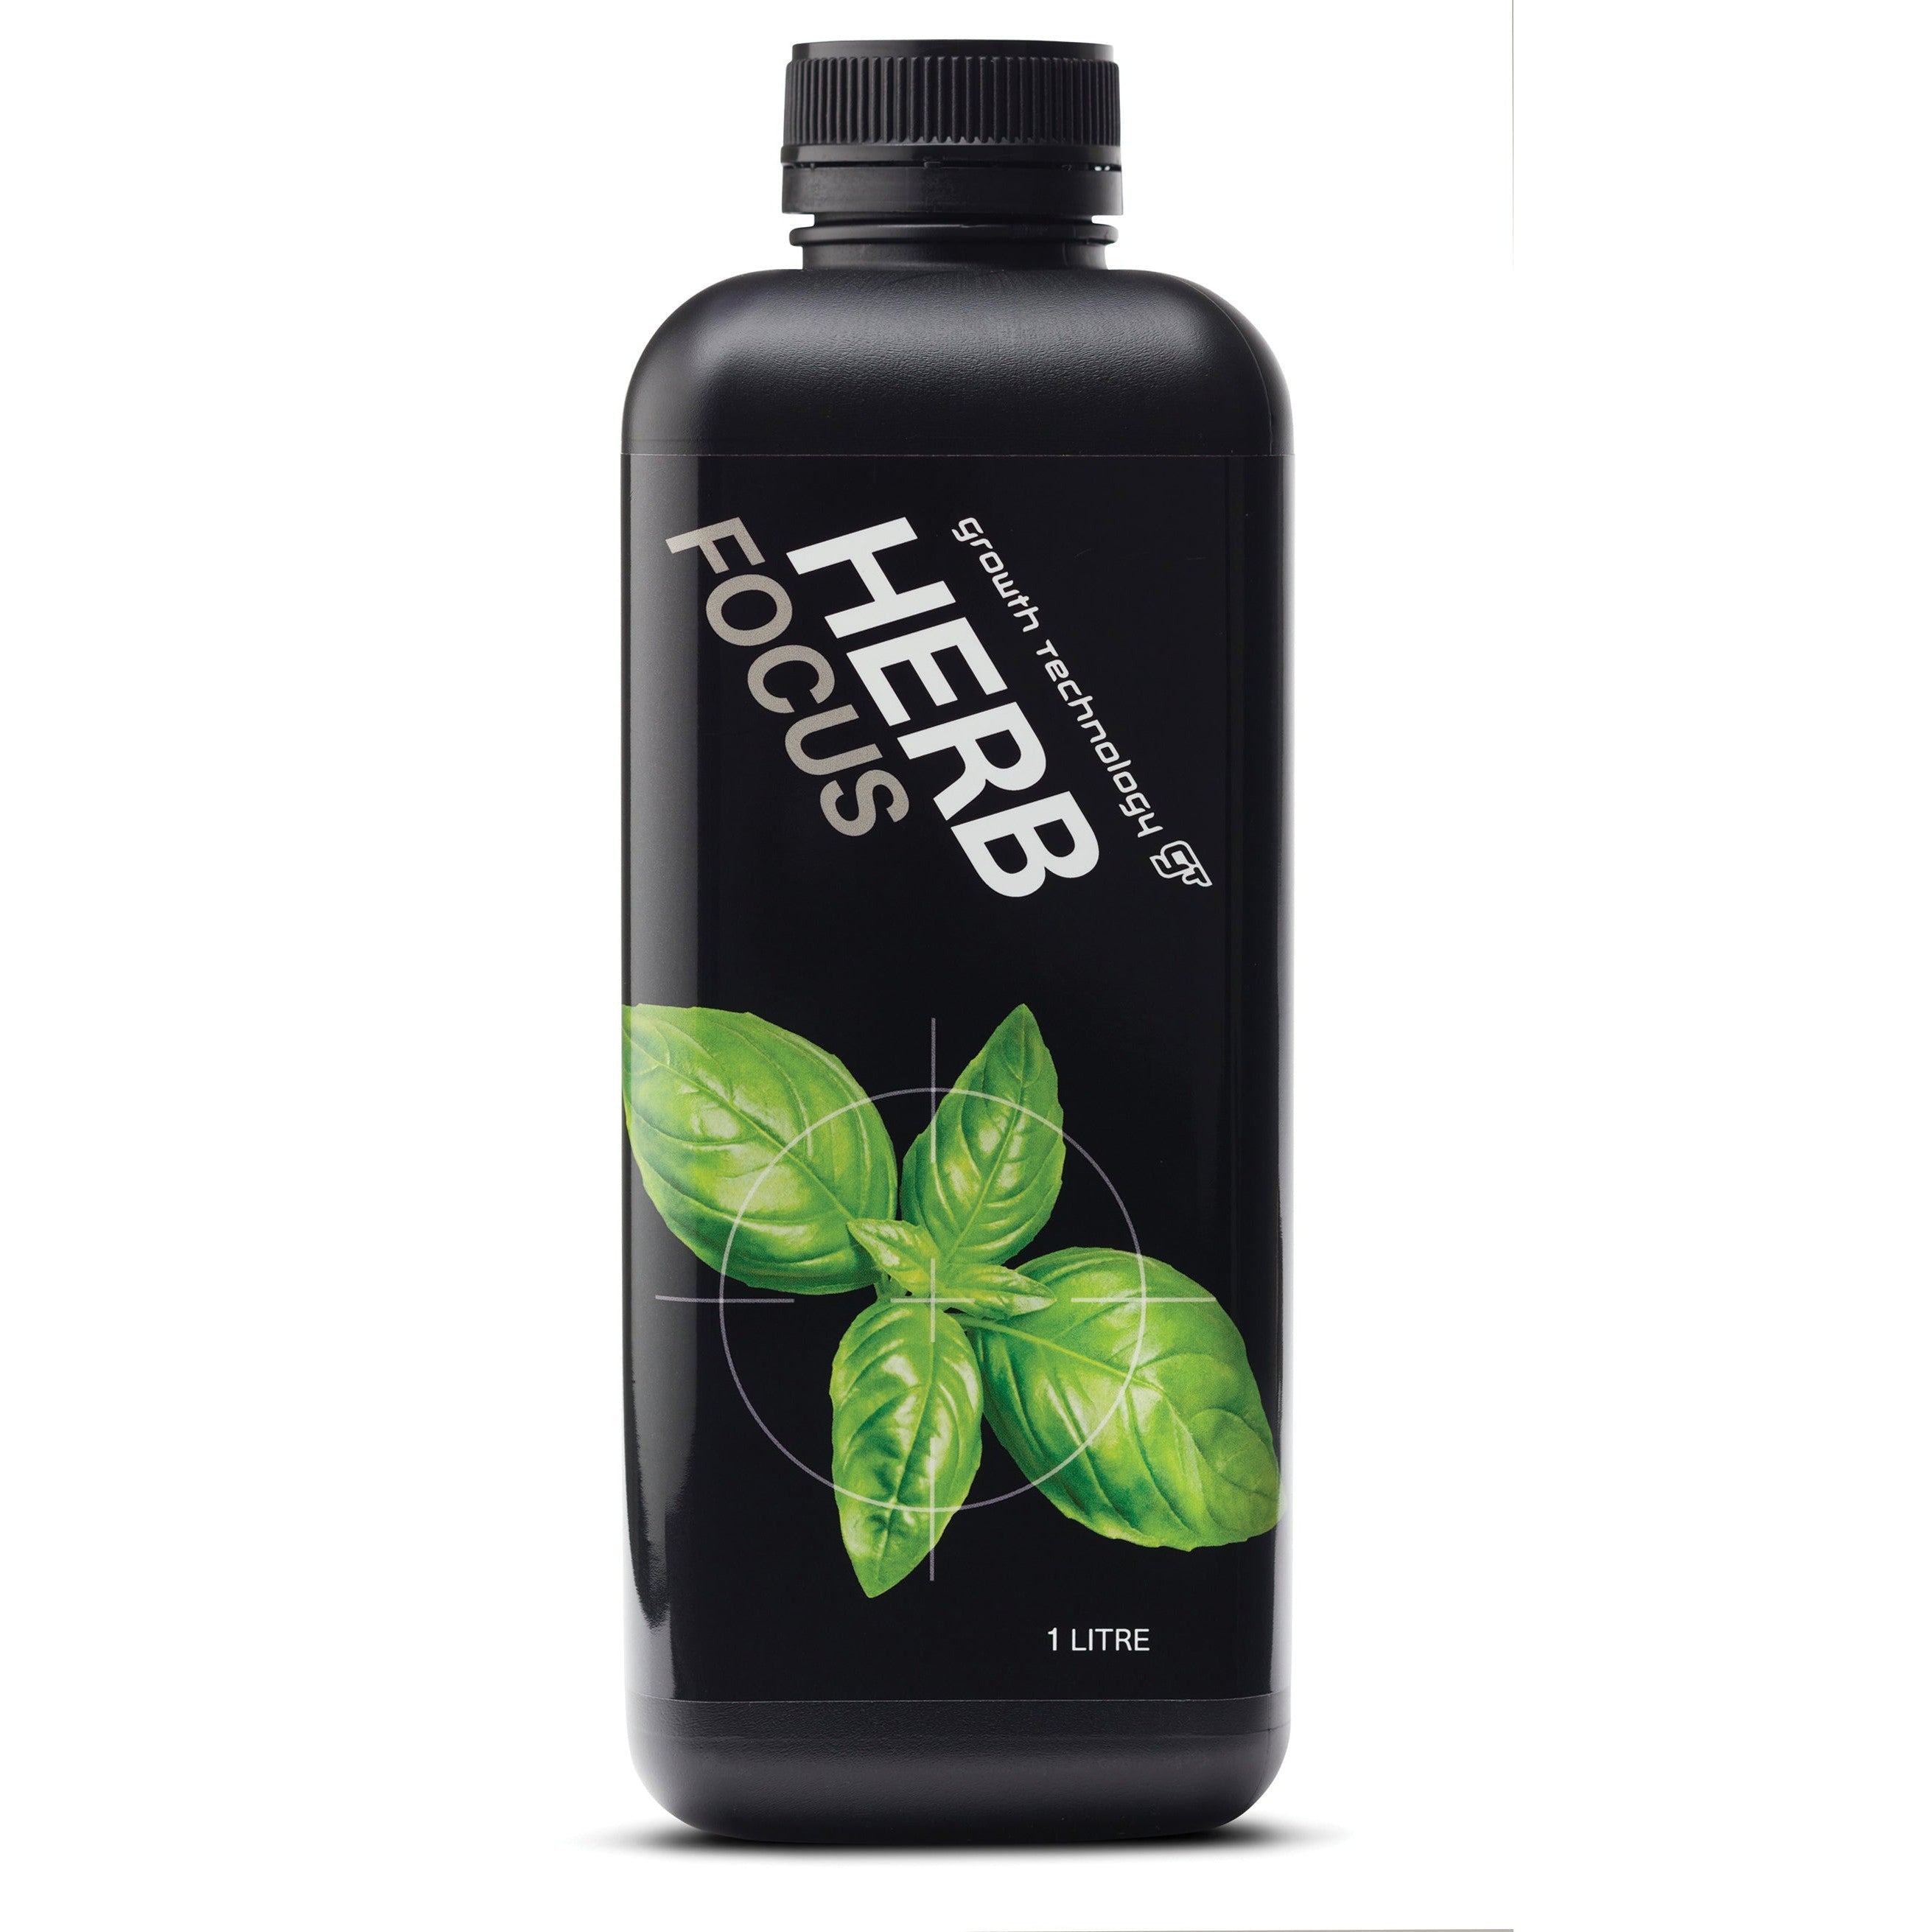 GT Herb Focus Nutrient Concentrate for Herbs, Lettuce & Leafy Greens - Hydroponic Solutions